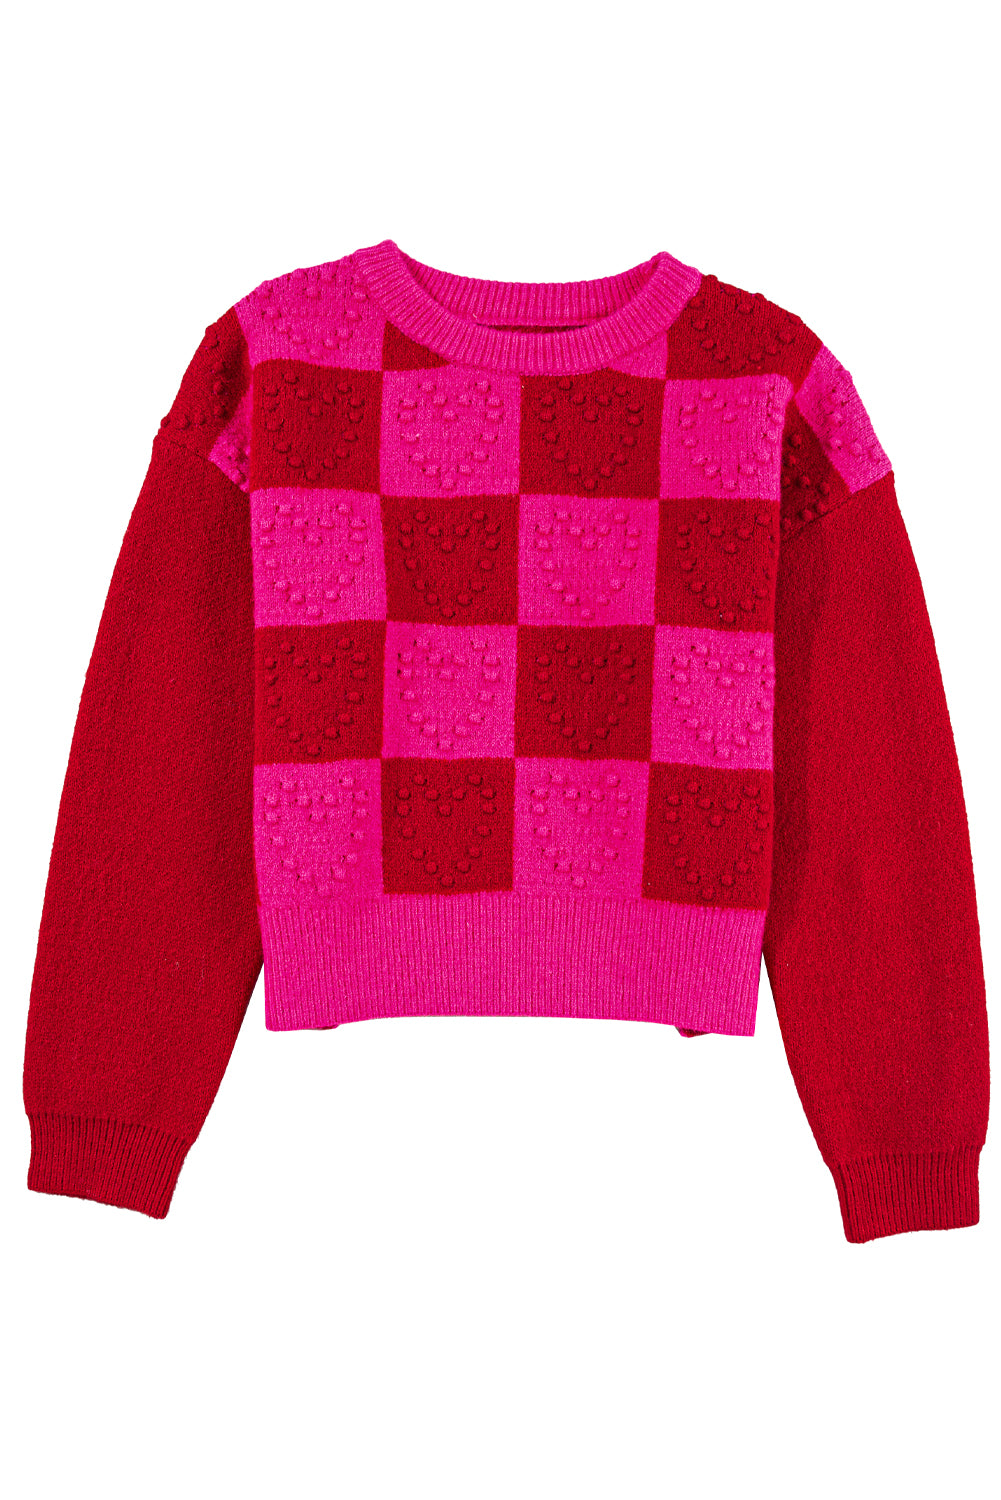 - Multicolor Checkered Pattern Heart Detail Textured Women's Sweater - womens sweater at TFC&H Co.